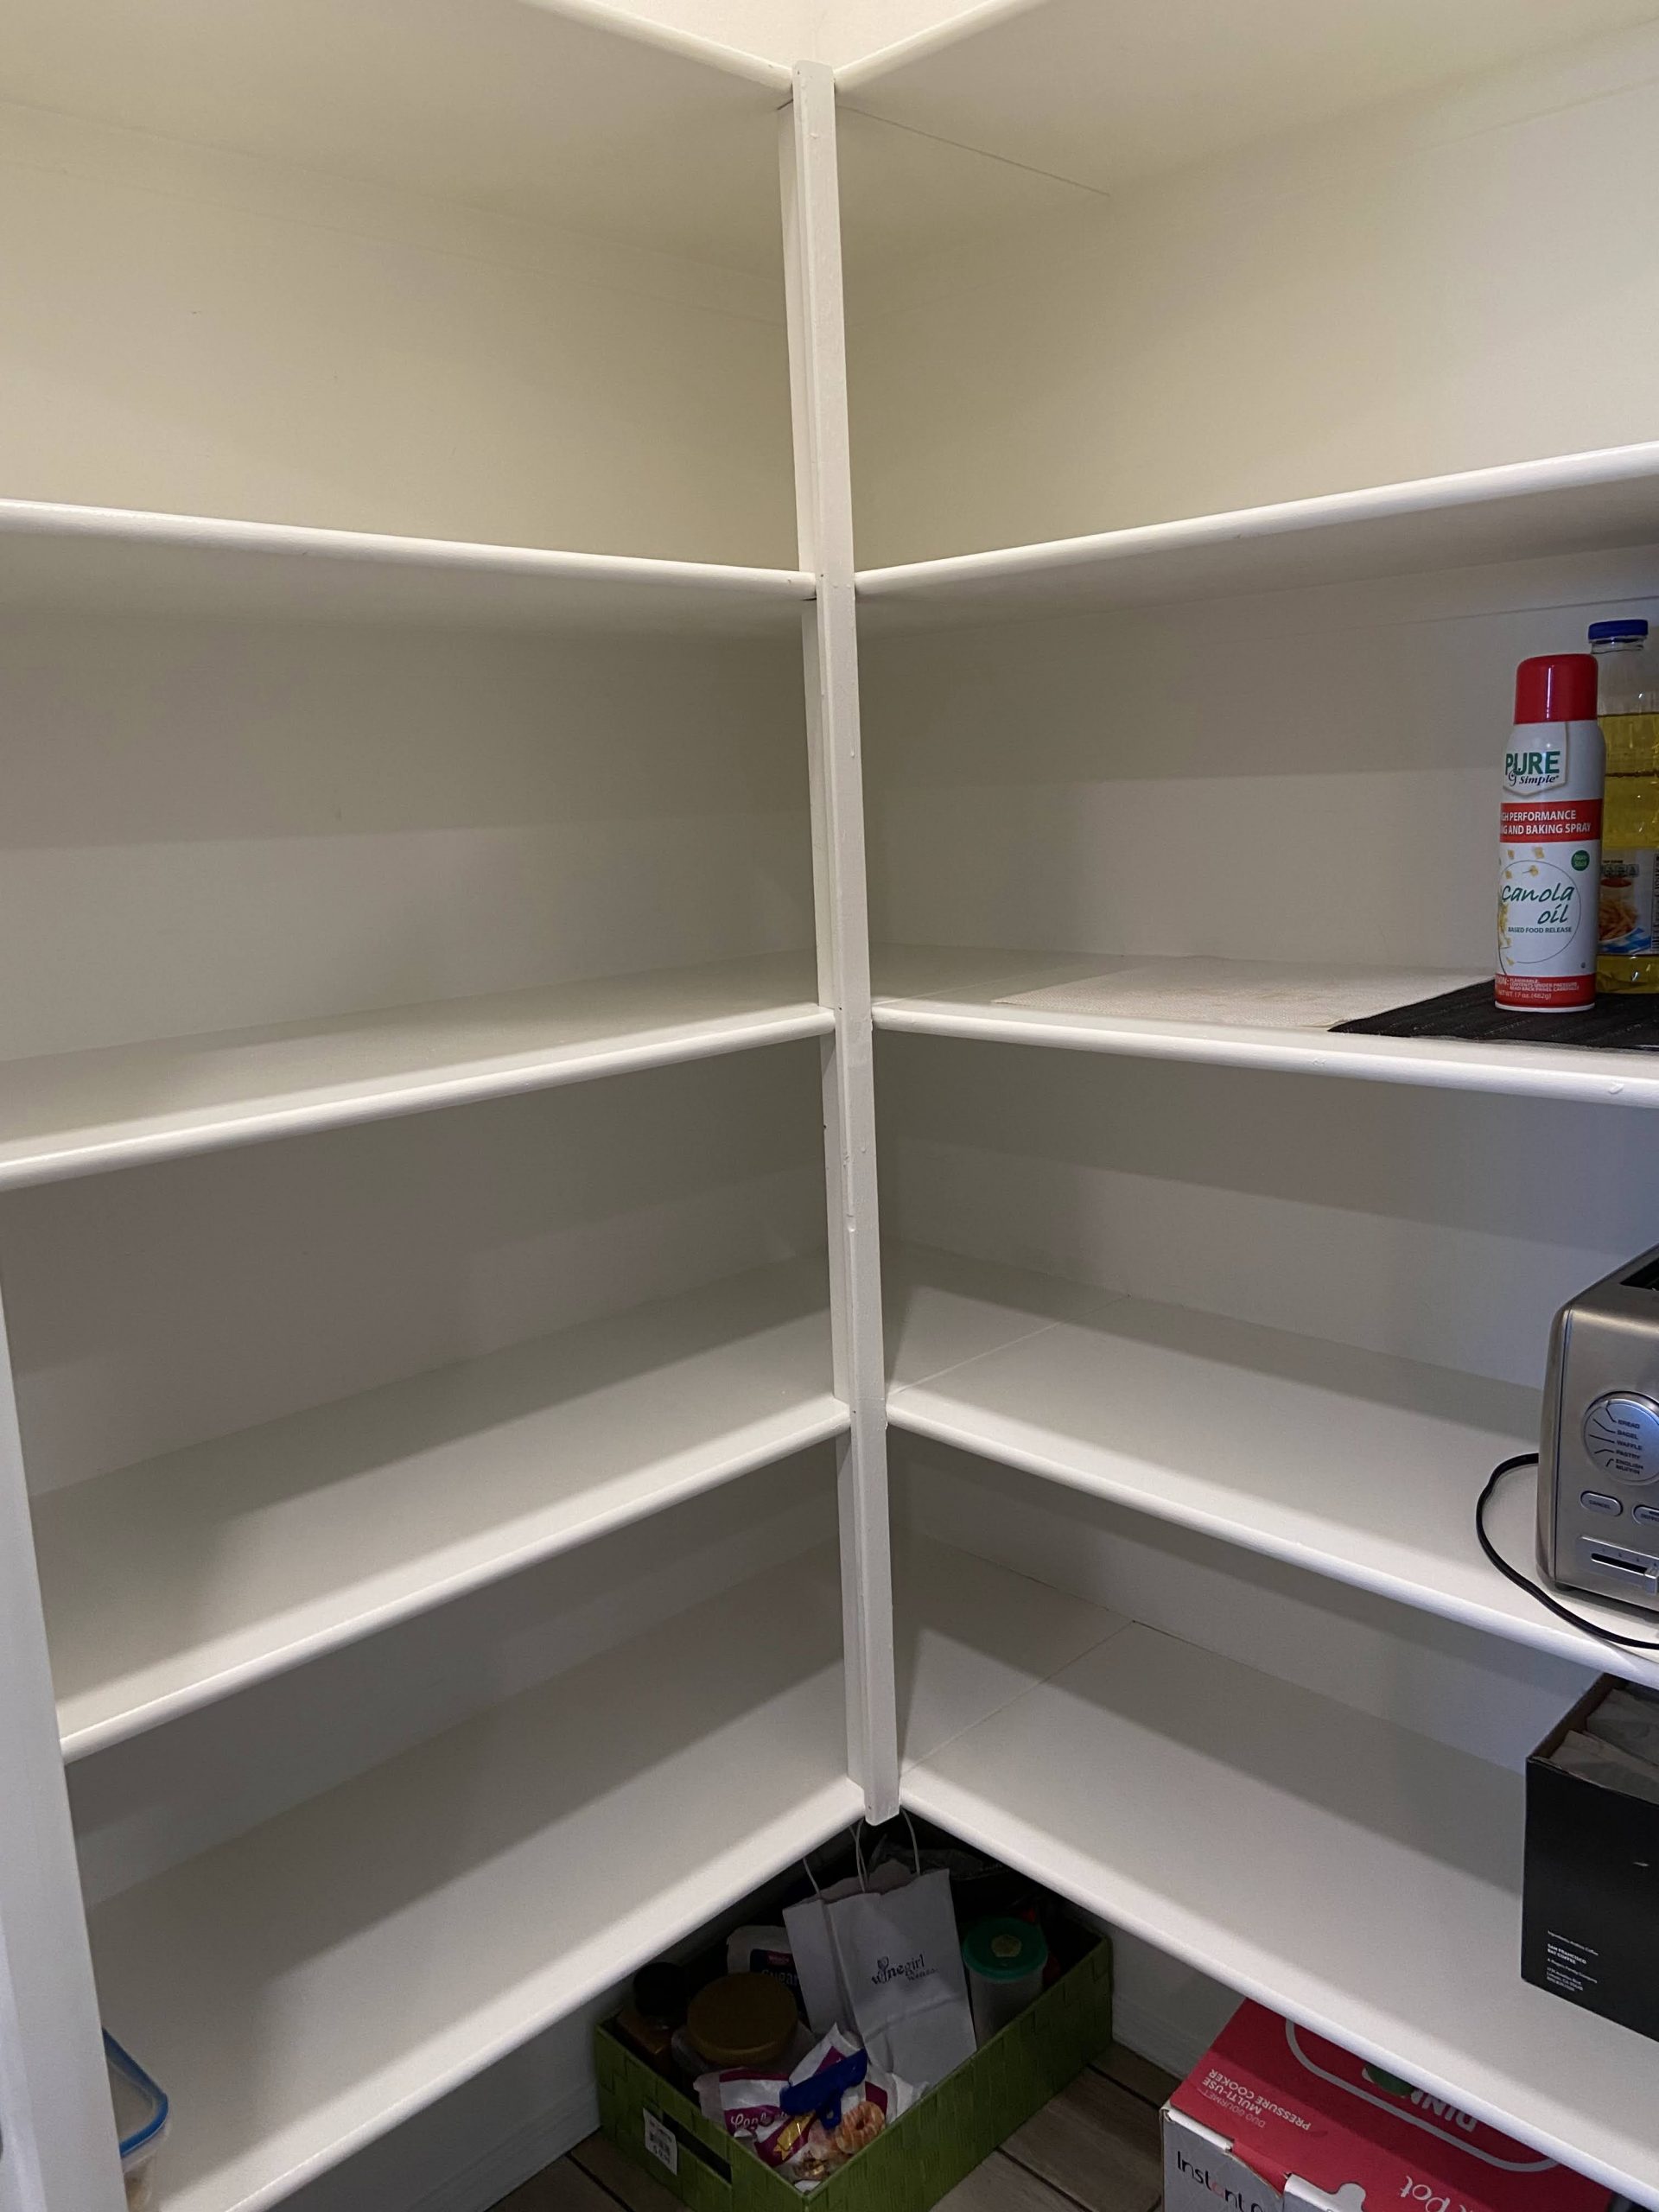 Photo of a nearly empty pantry.